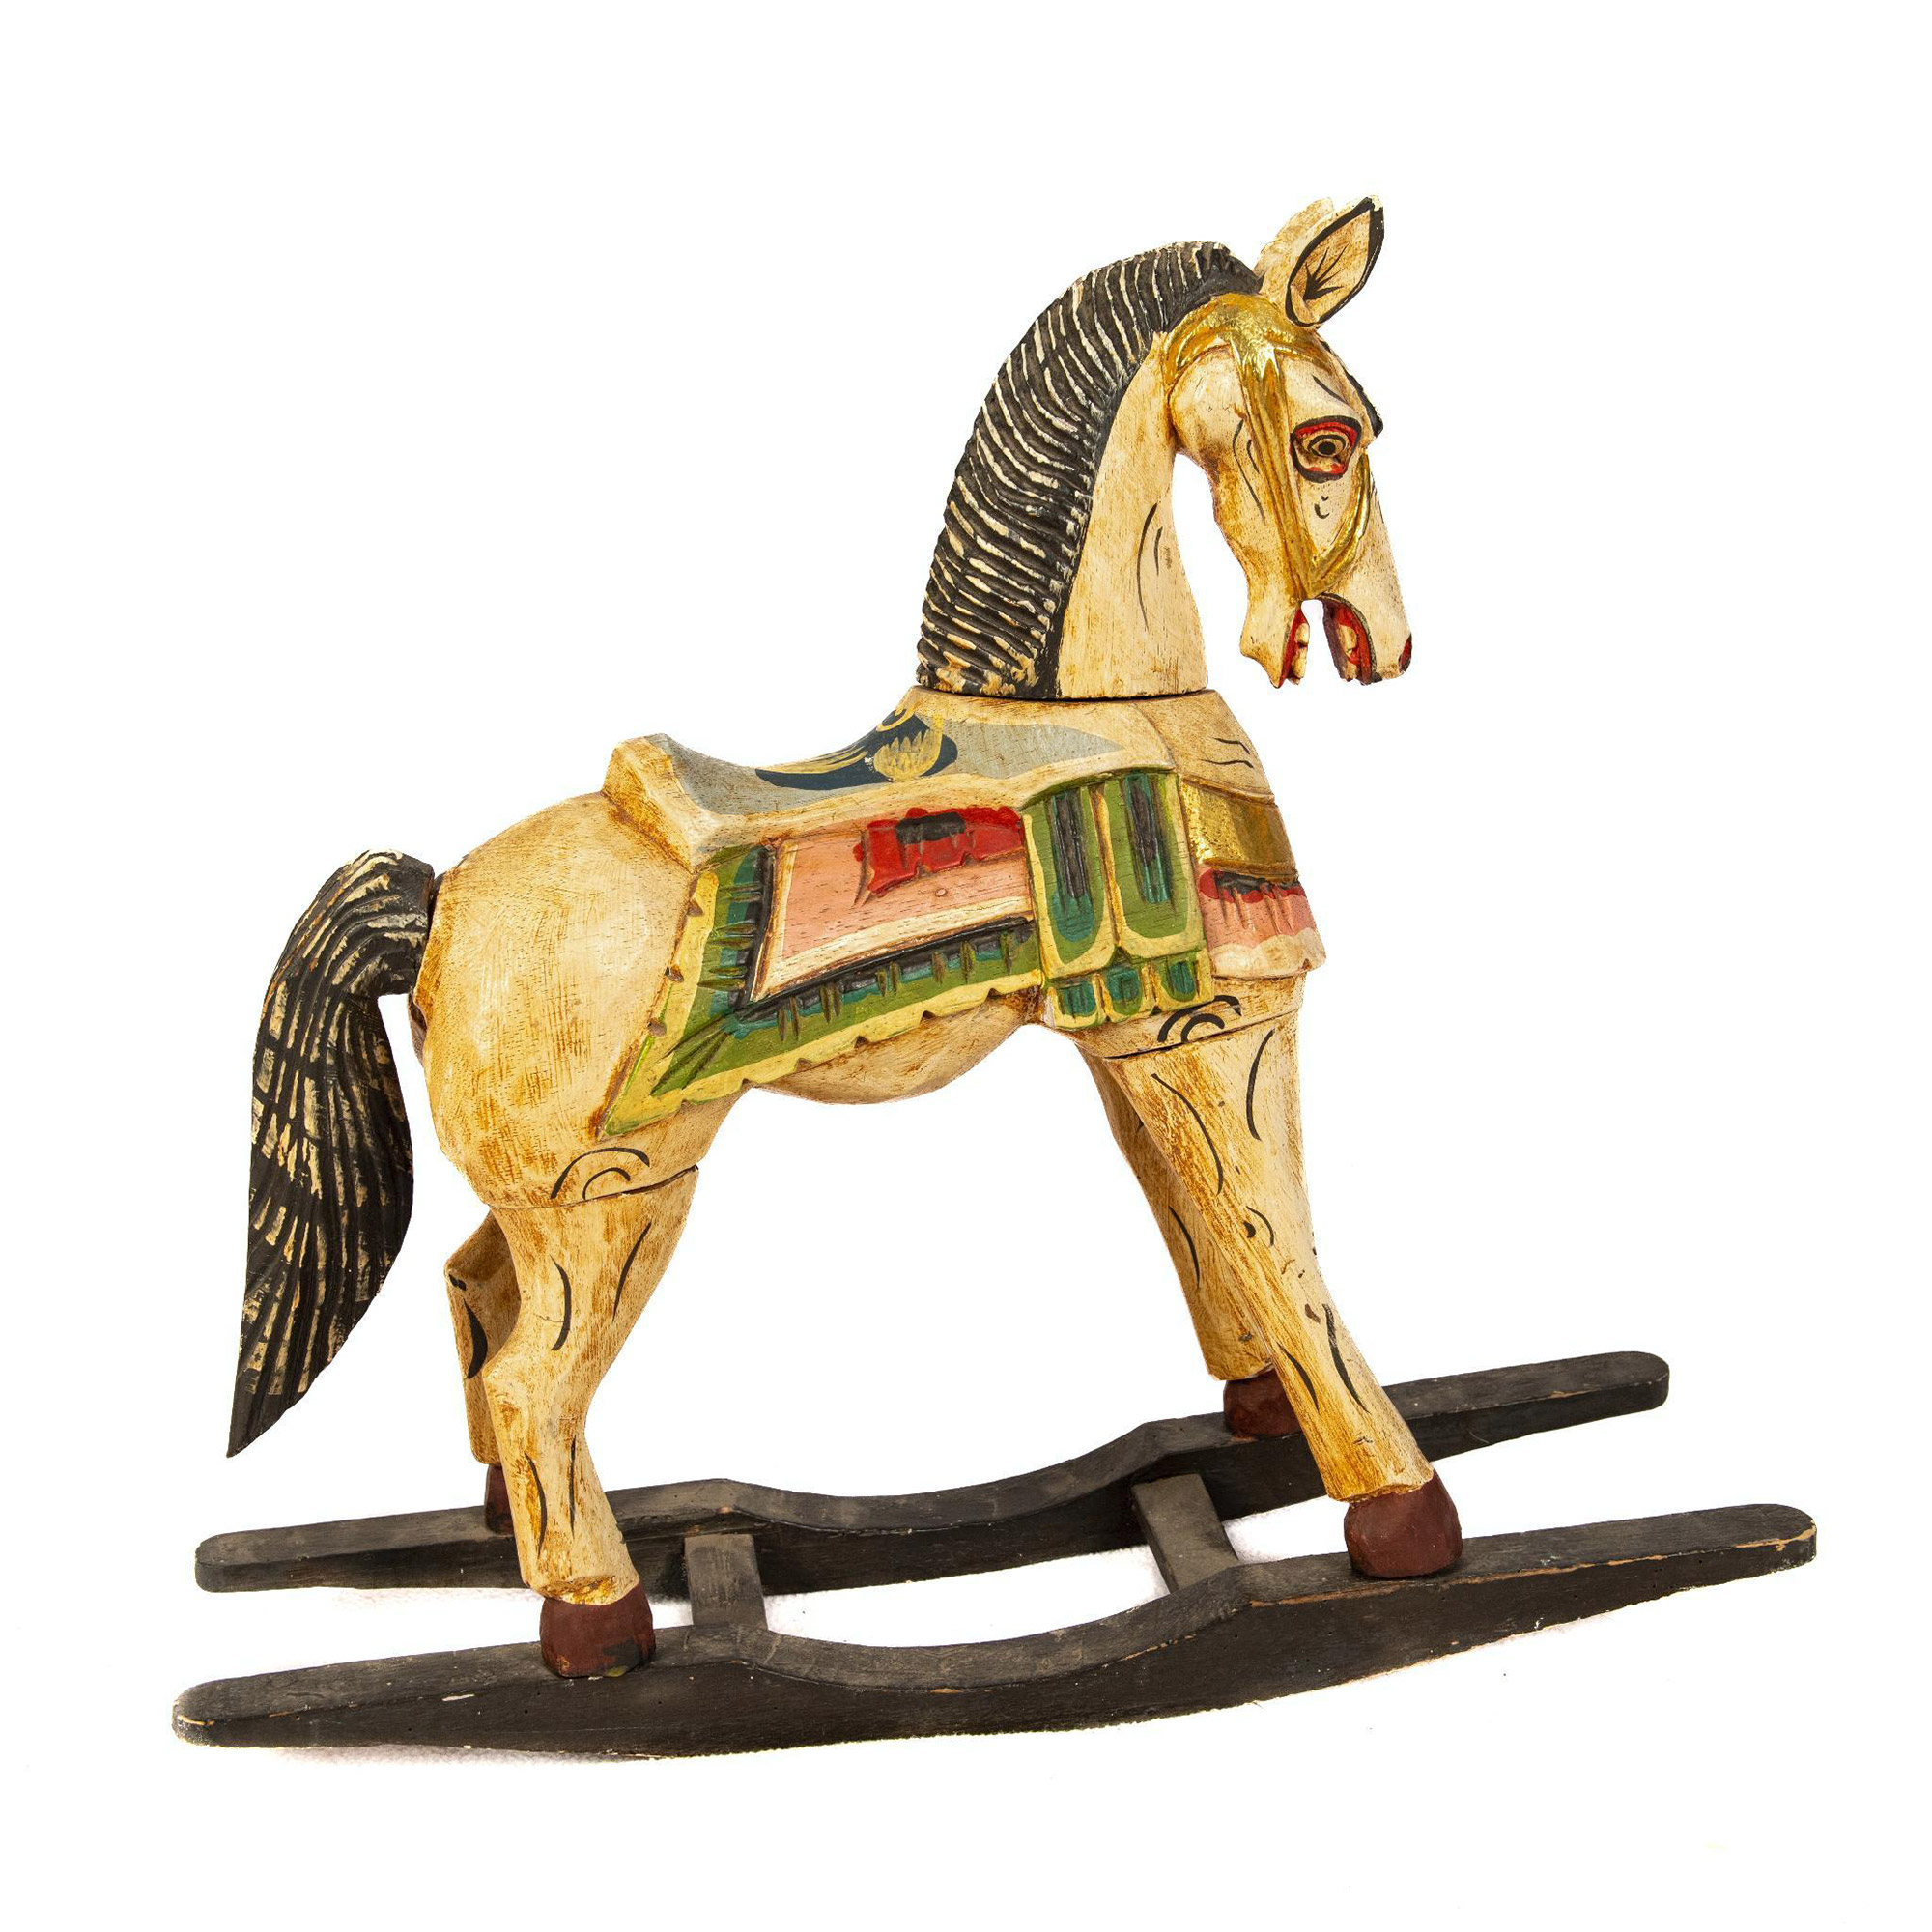 Small Decorative Wooden Carousel Rocking Horse - Image 4 of 6